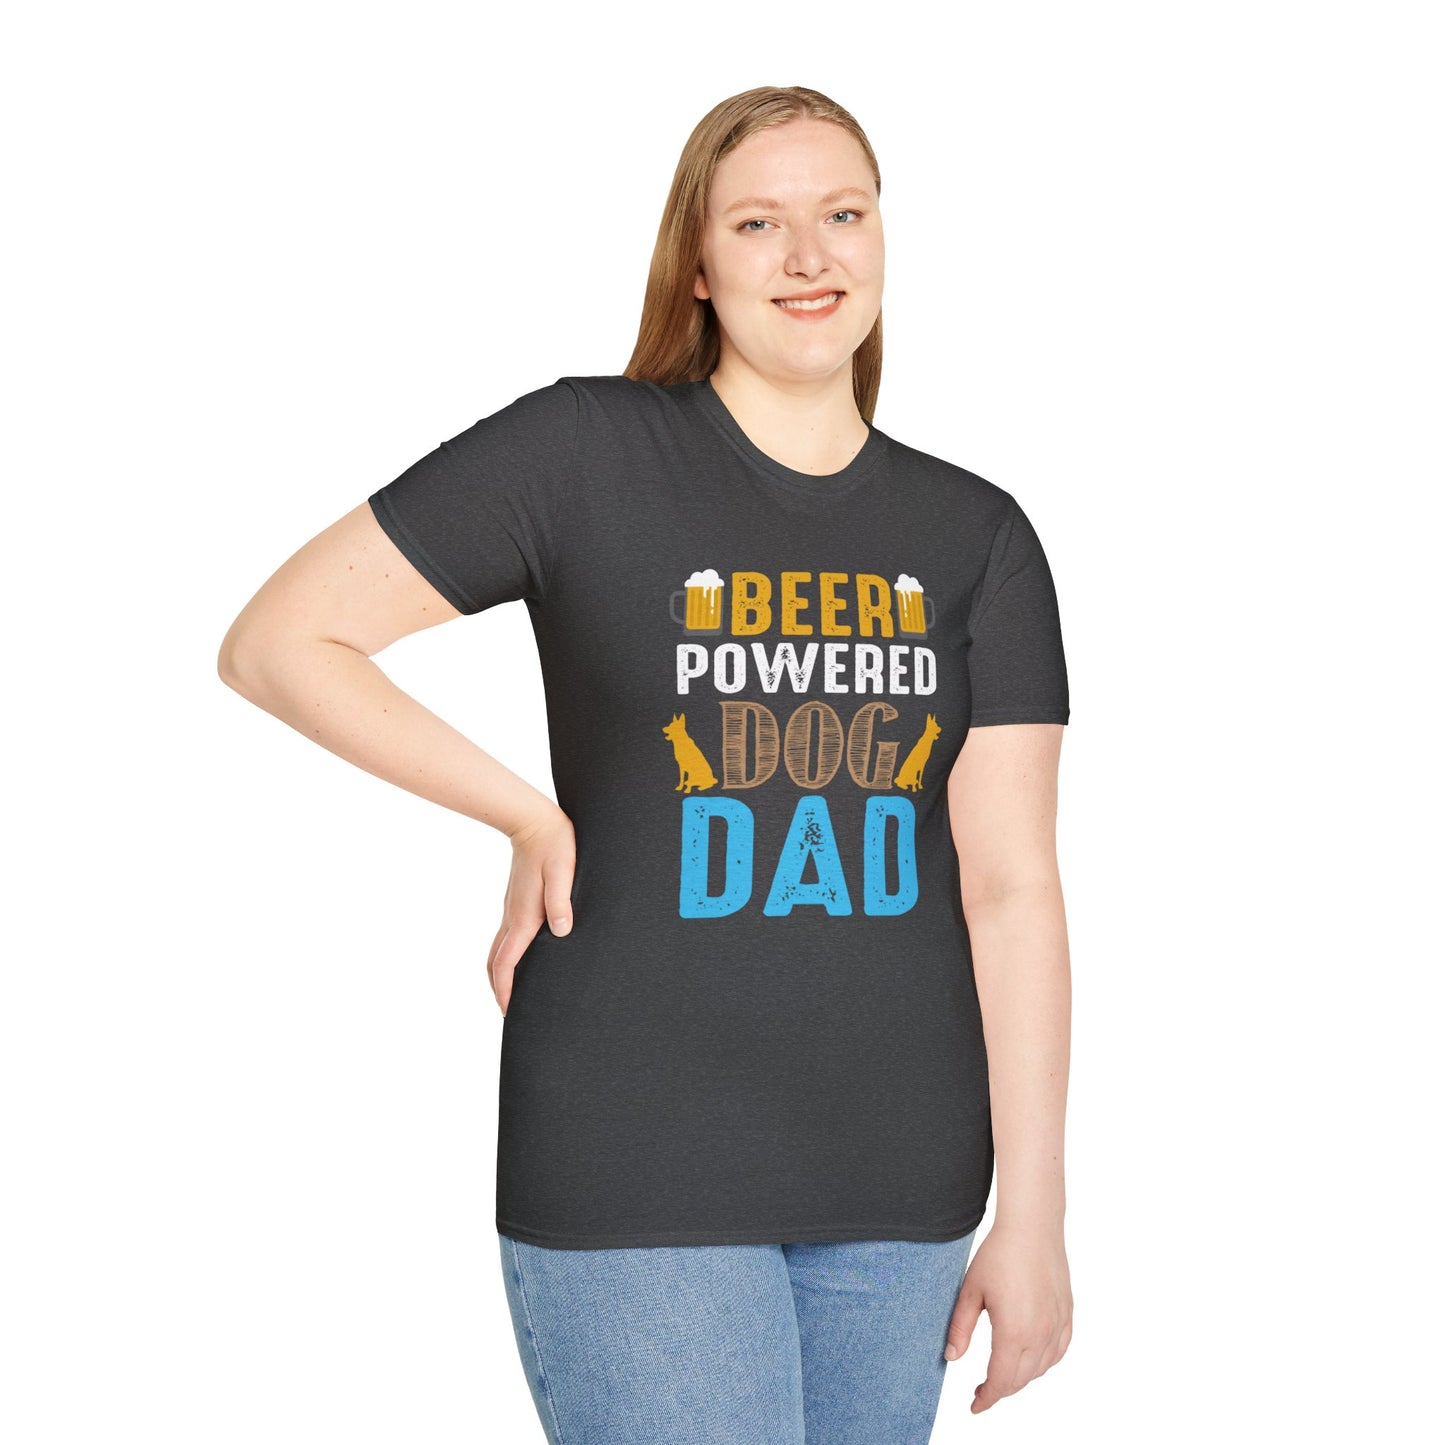 BEER POWERED DOG DAD Tee: Stylish and Comfortable Shirt for Pet-loving Fathers!